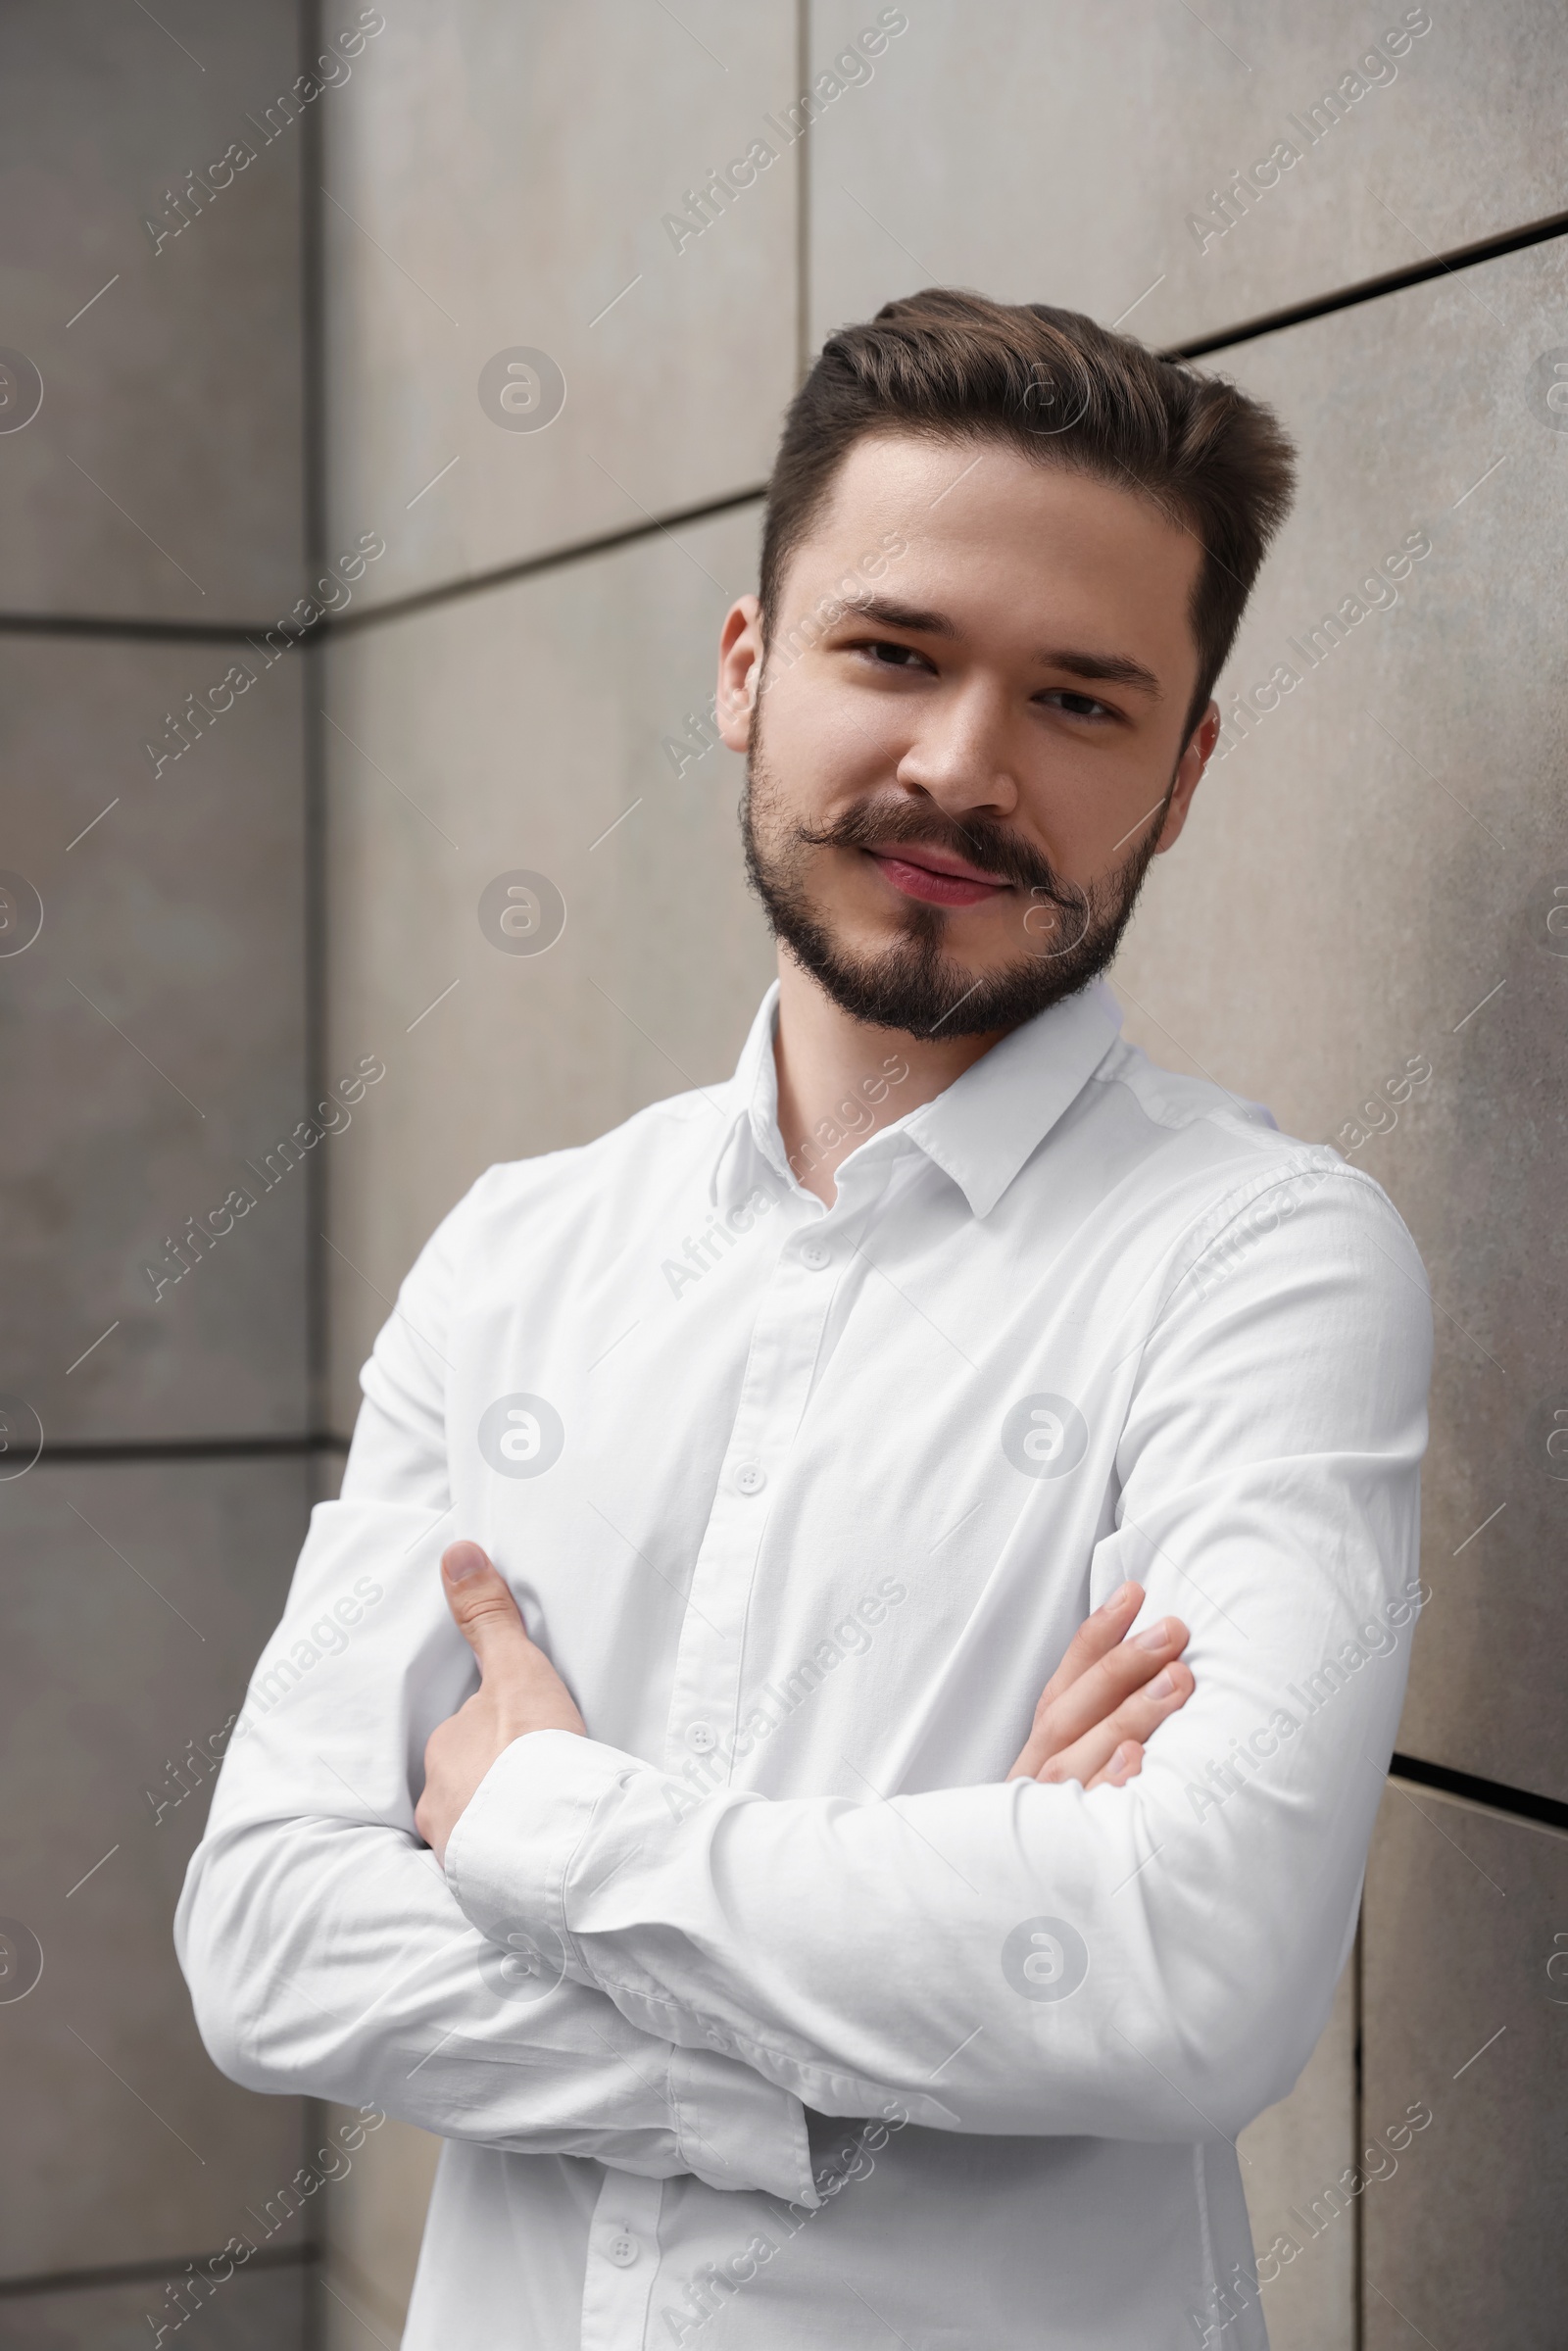 Photo of Smiling man in white shirt crossing his arms near light grey brick wall